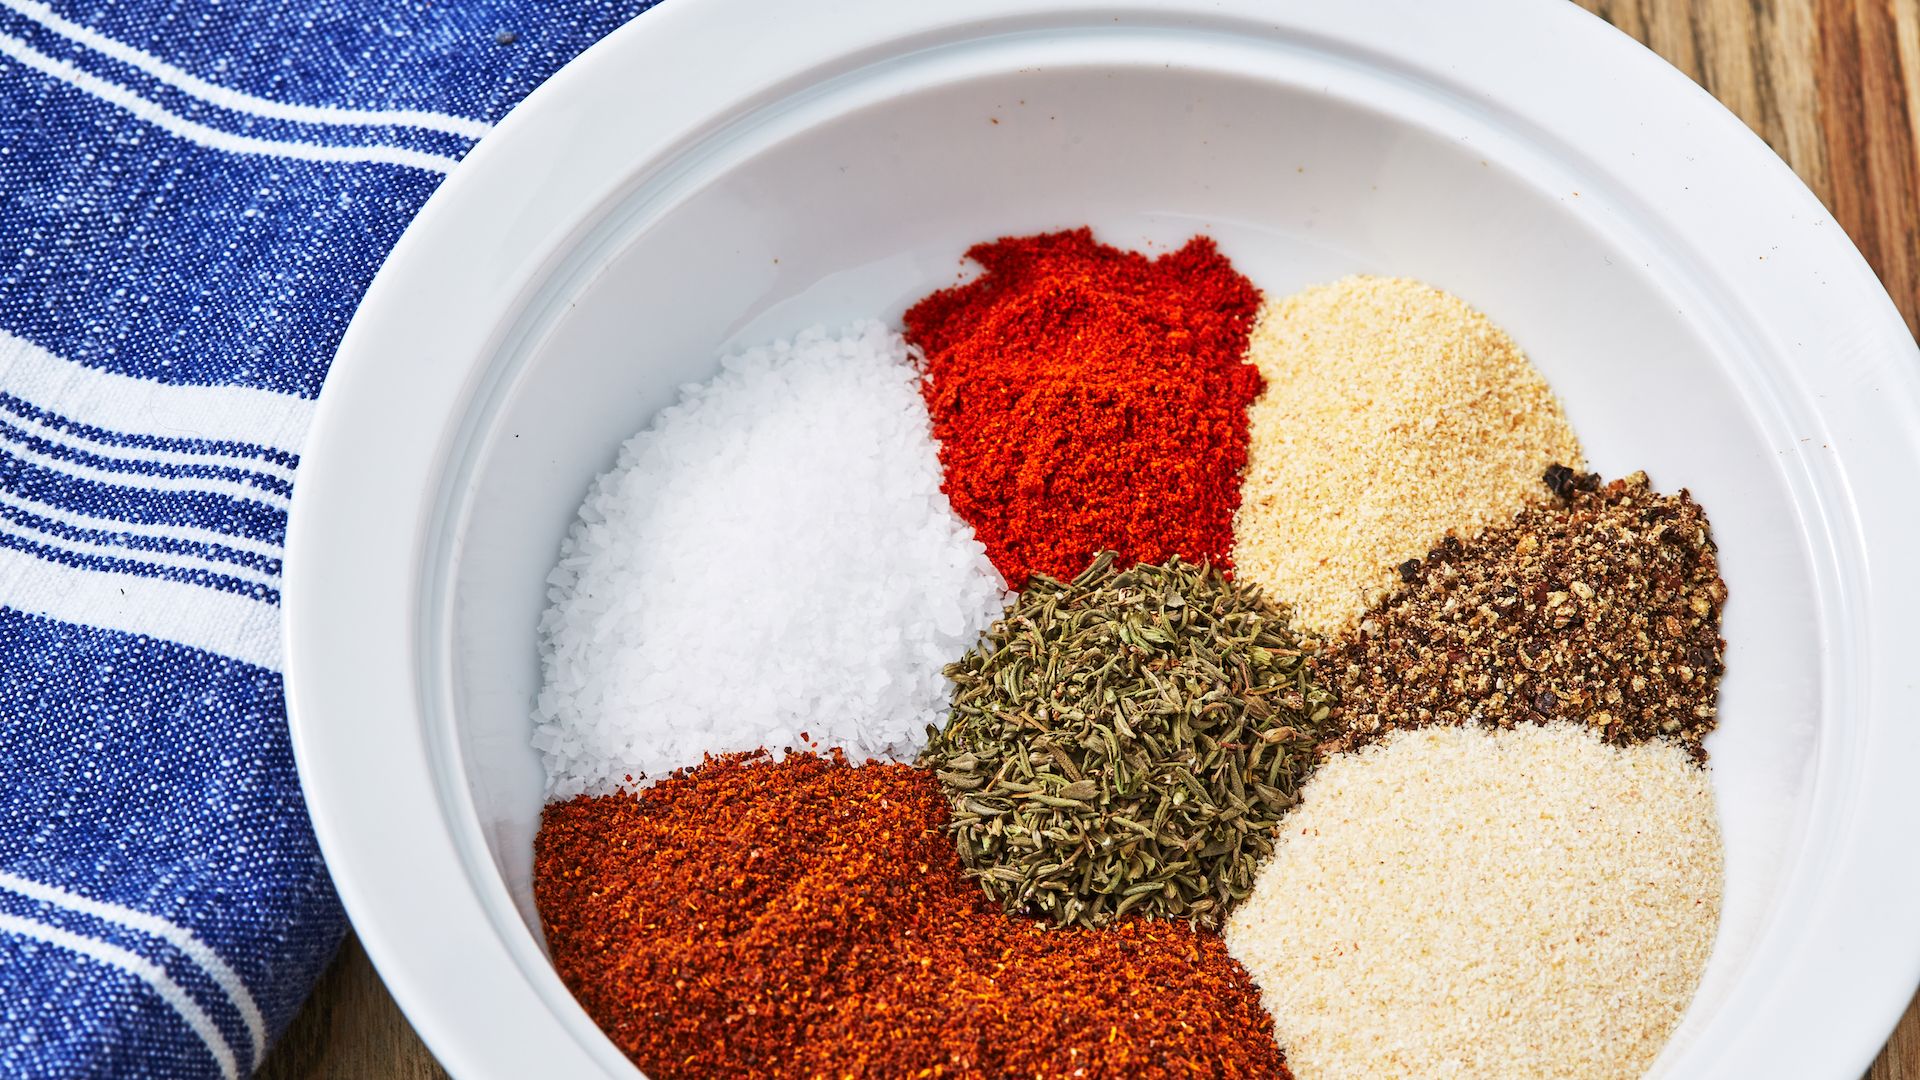 The Store-Bought Creole Seasoning That Every Southern Cook Needs